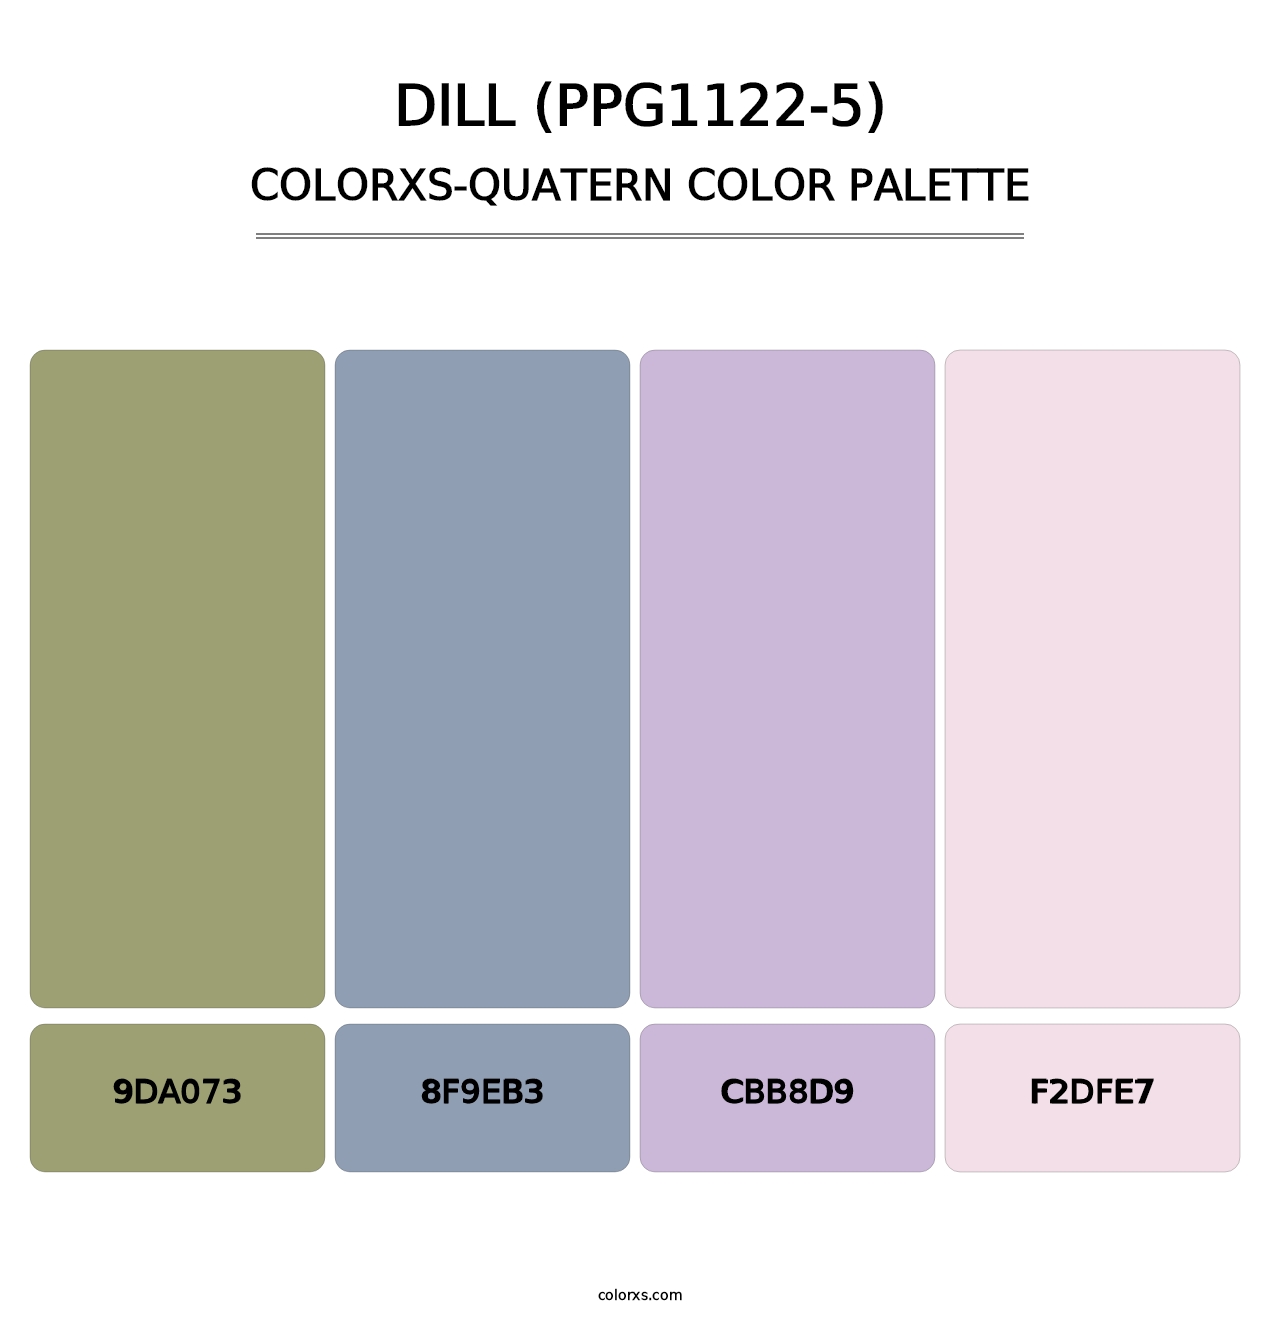 Dill (PPG1122-5) - Colorxs Quatern Palette